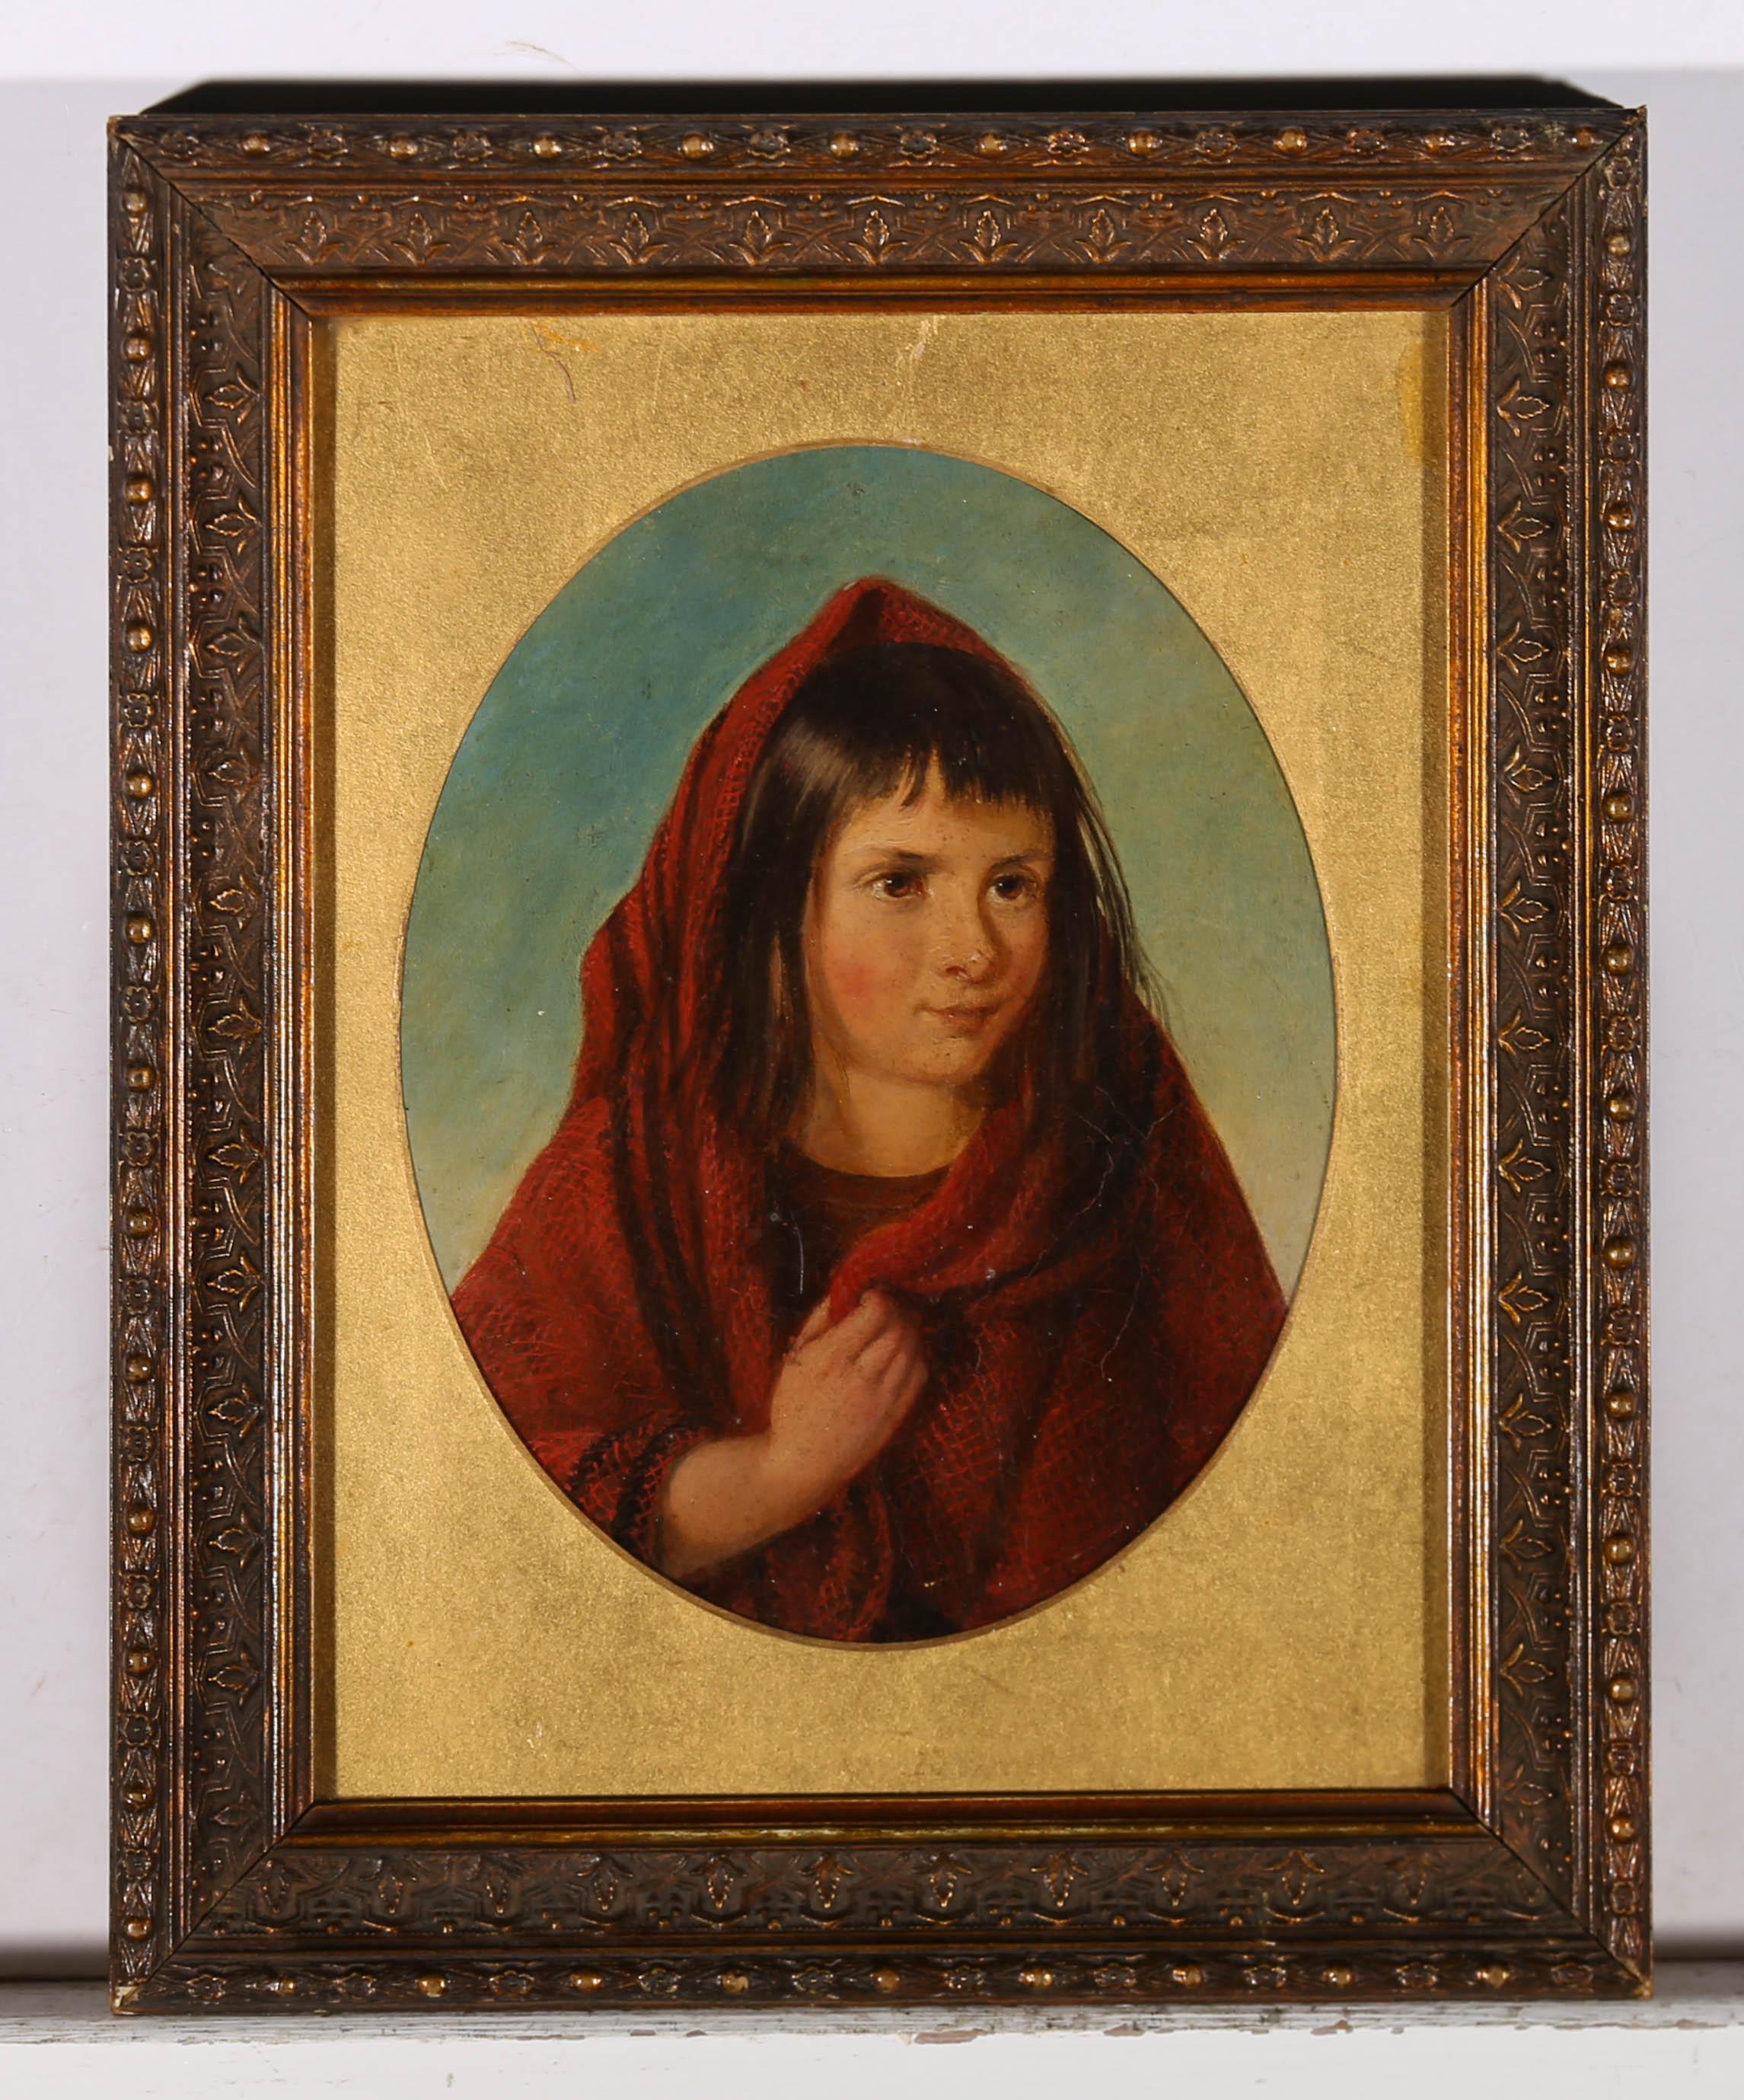 A charming mid 19th Century oil portrait of a softly smiling little girl with dark hair. She is wearing a woven red shawl over her head which she holds together at her chest. The red of her shawl contrasts nicely with the blue of the sky behind her.